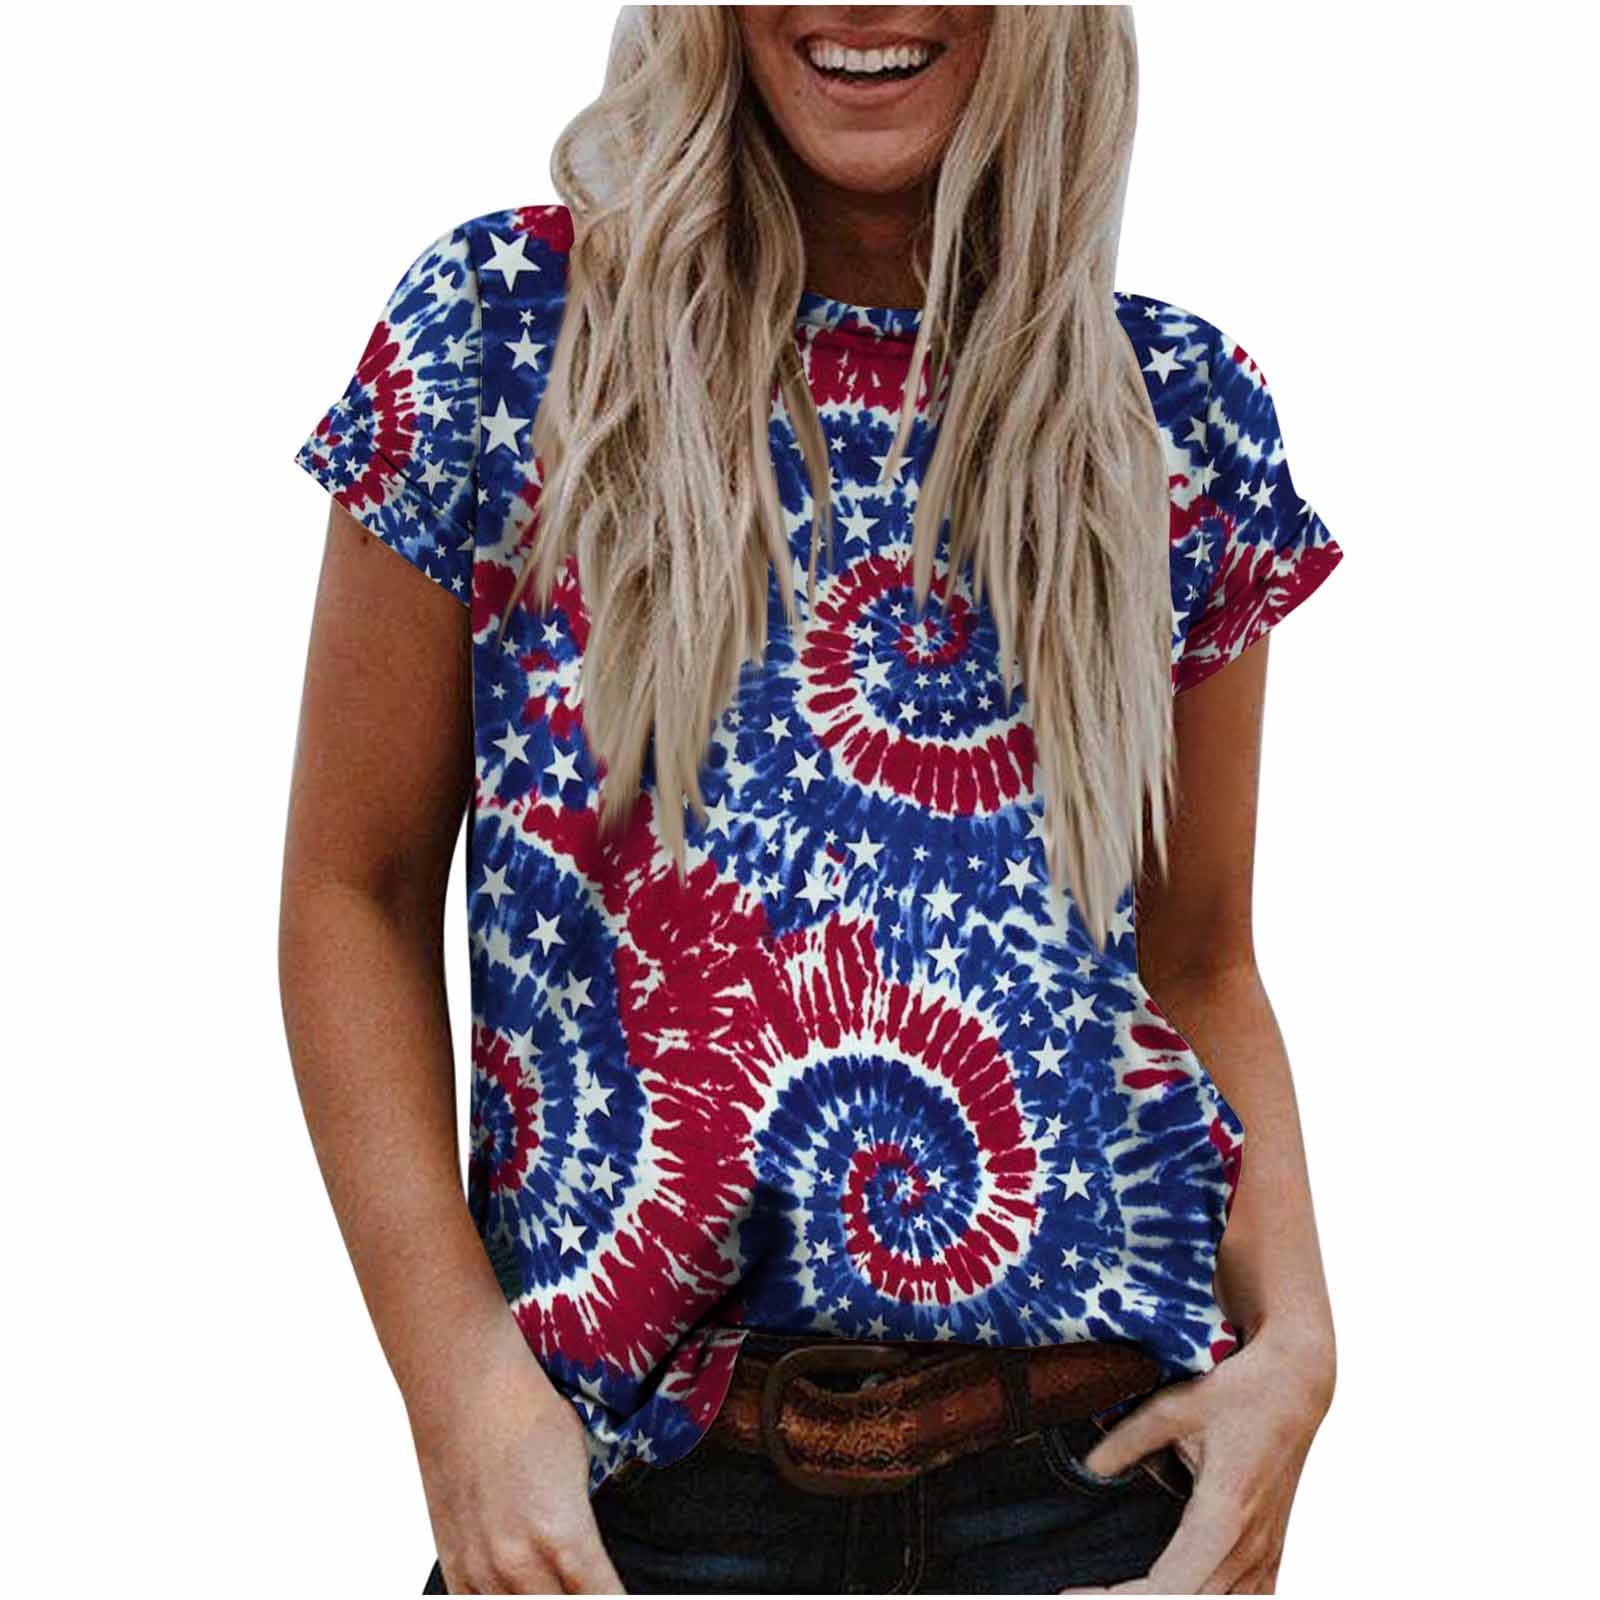 LWZWM Red White Blue Tops For Women Retro Tops Evening Tops Stylish ...